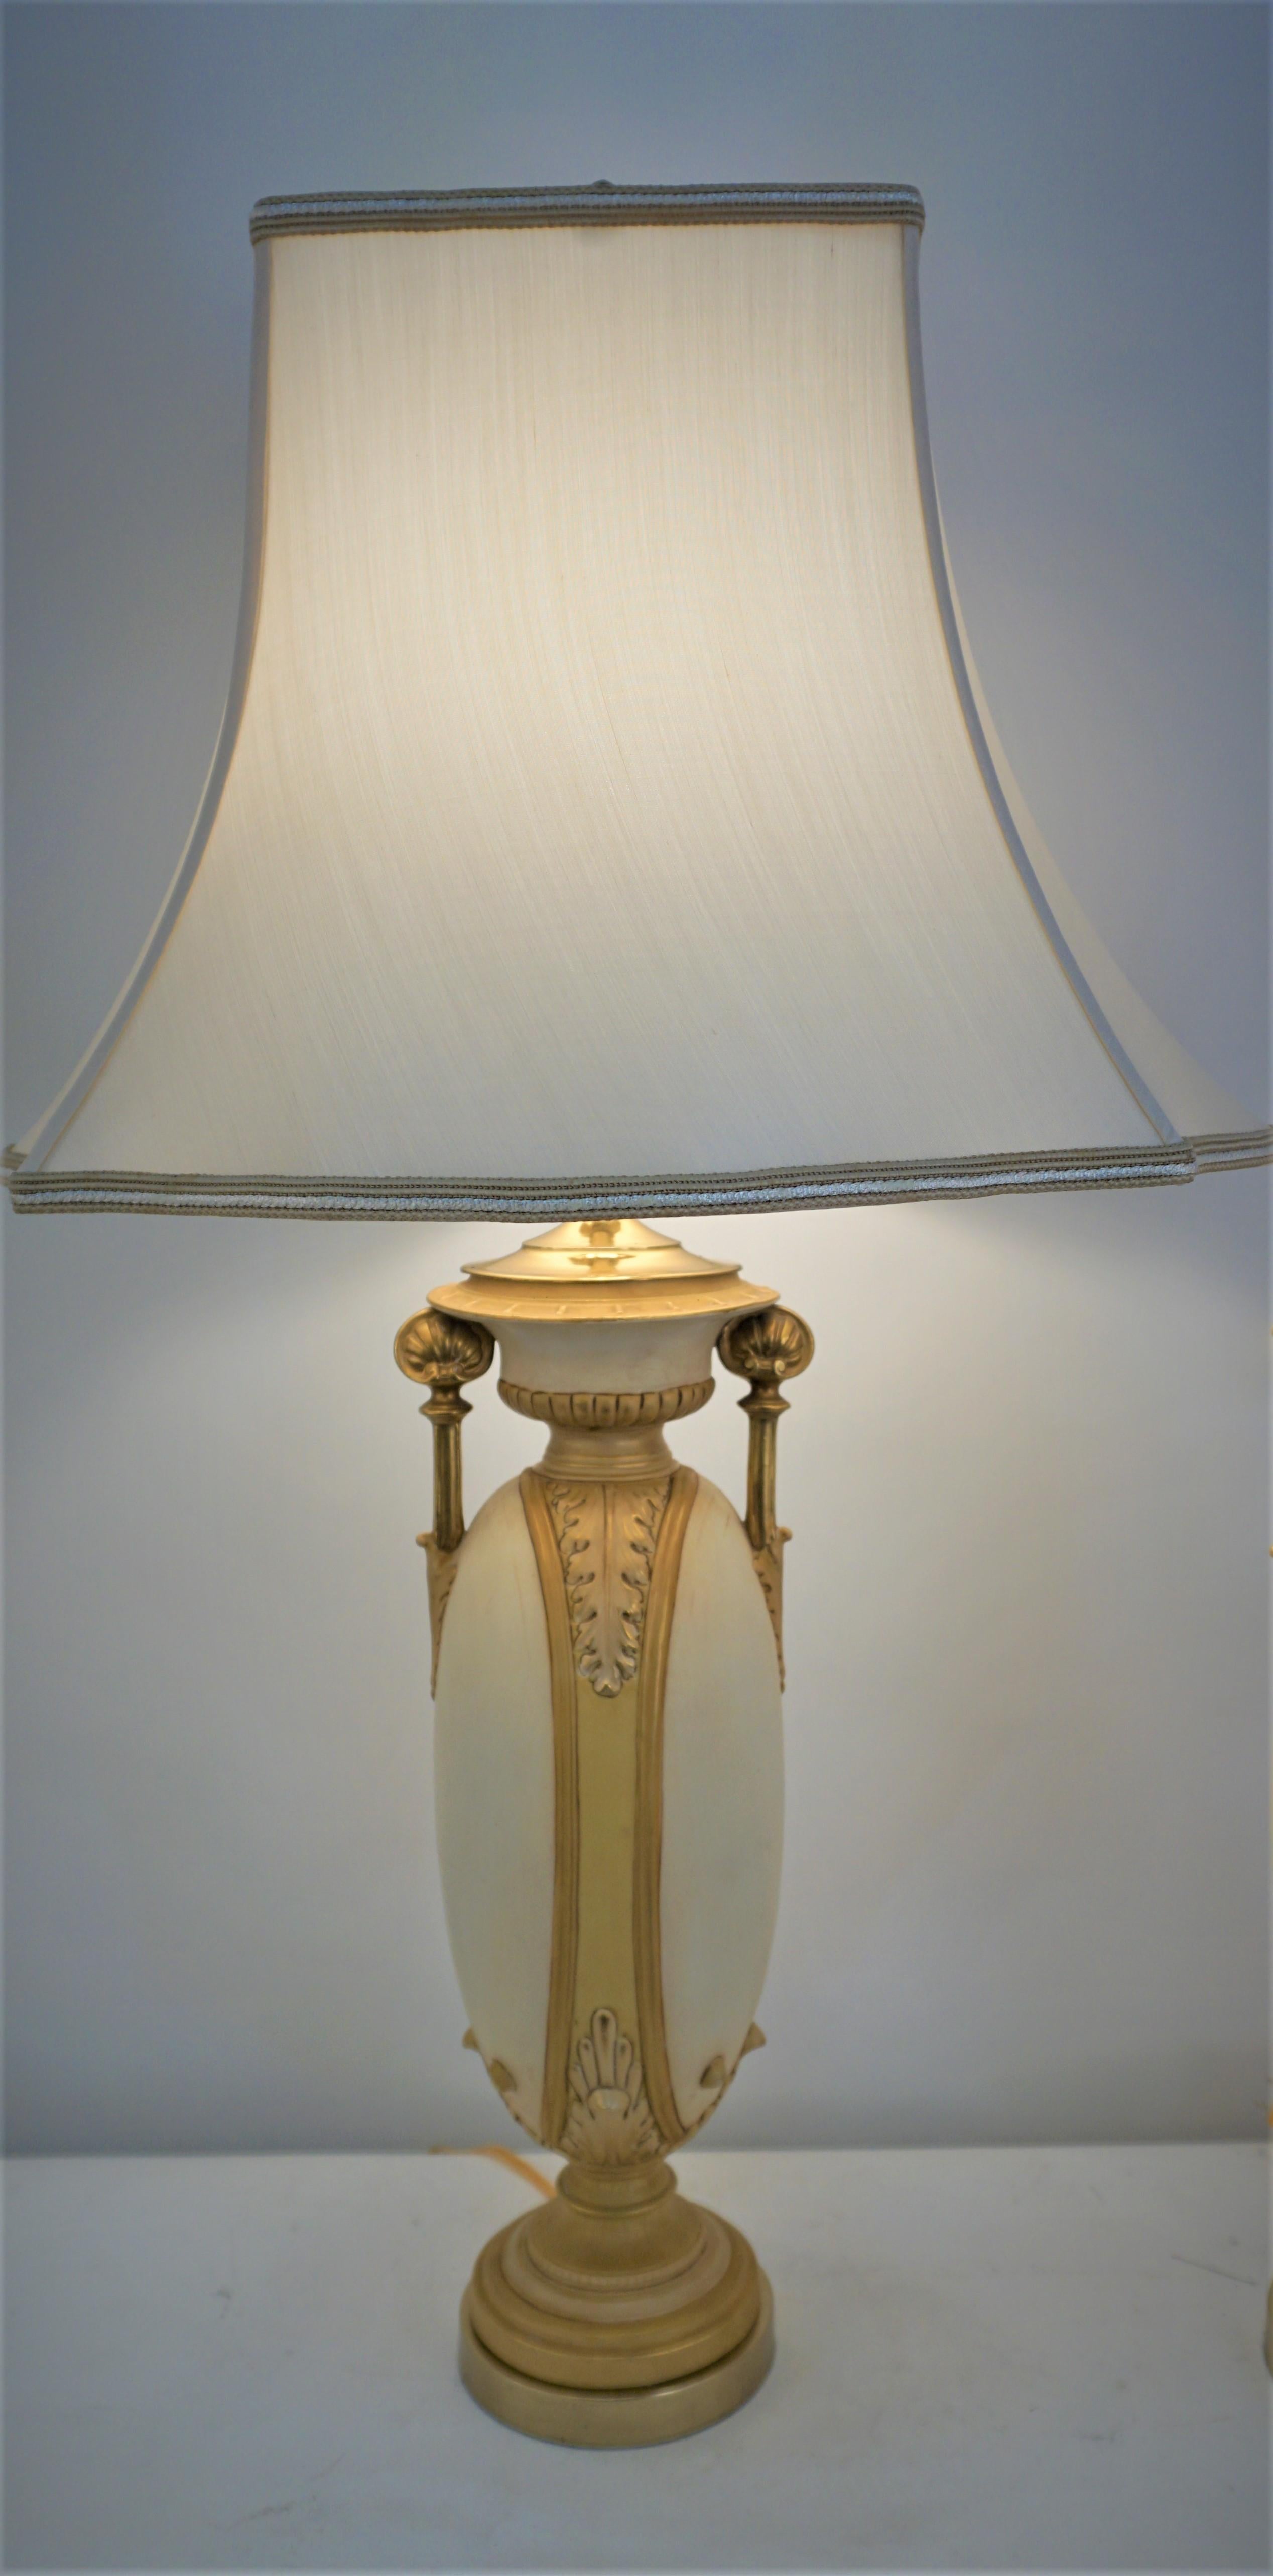 Pair of classic design porcelain vases that have been customized as table lamps and fitted with silk lamp shades.
Measurement includes the lampshades.